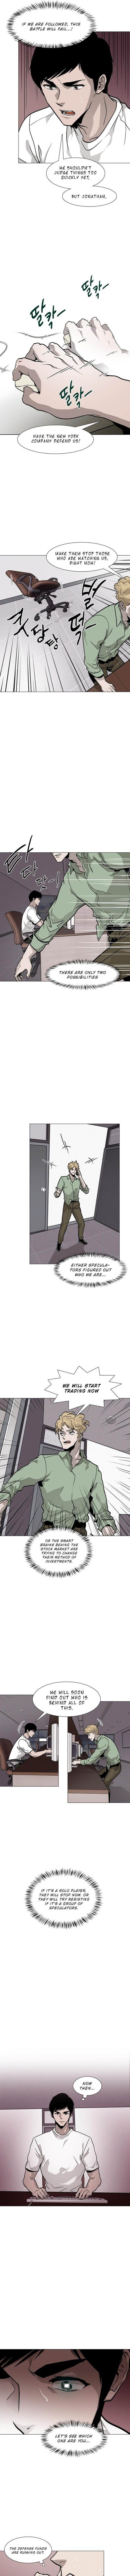 Past Life Regressor Chapter 16 page 9